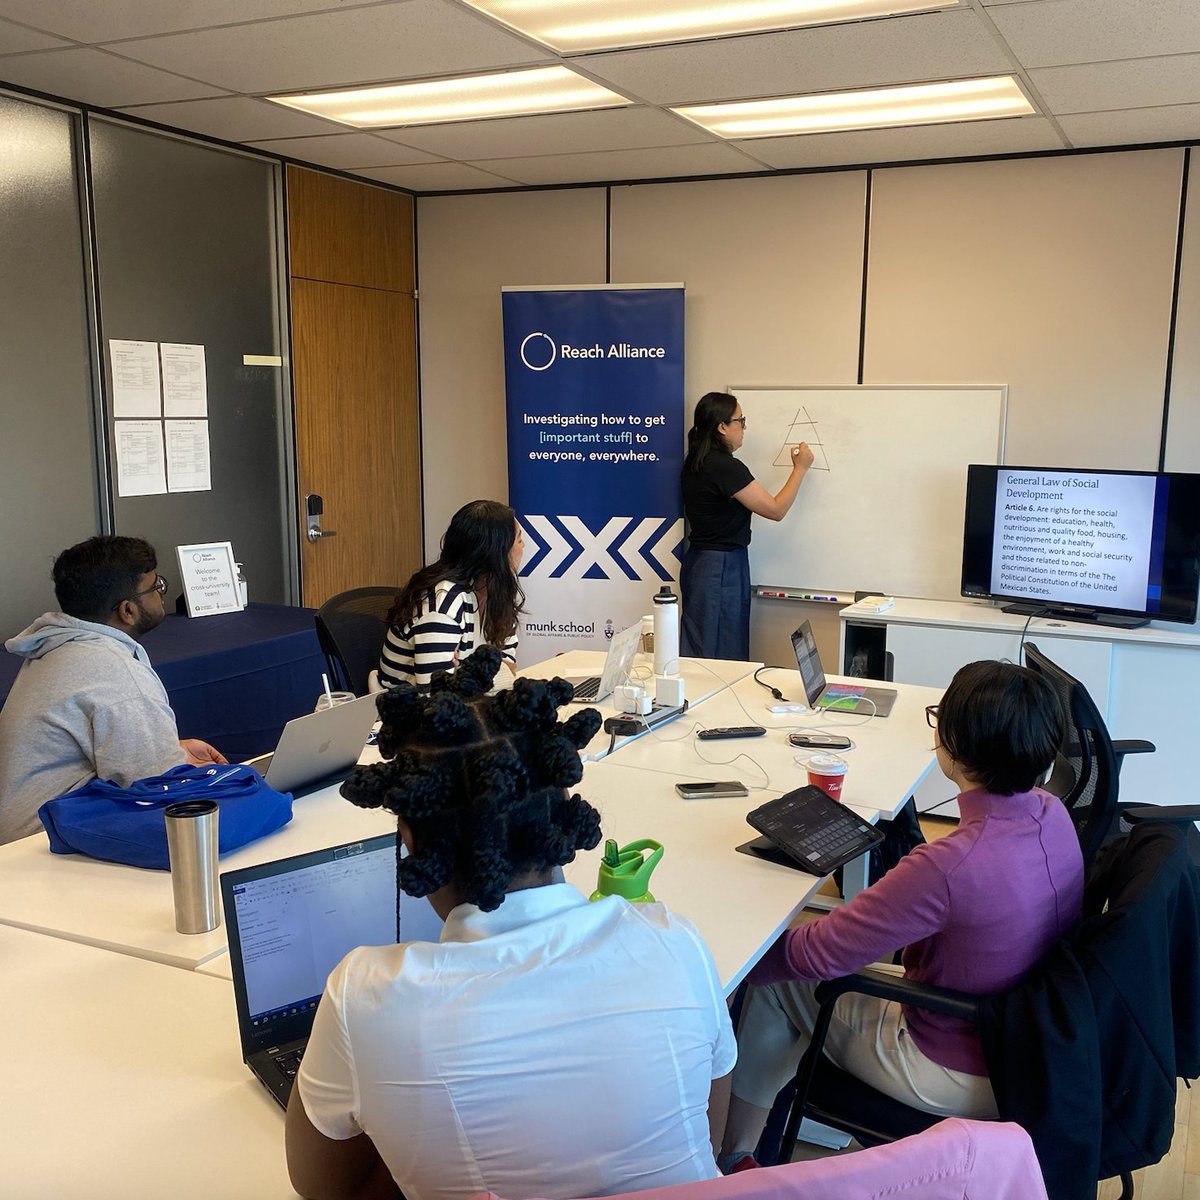 We’re excited to announce the first @ReachAllianceTO cross-university team with student researchers from @UofT & @TecdeMonterrey, supported by @mccallmacbain. This week our @TecdeMonterrey researchers arrived in TO to meet their @UofT teammates for onboarding, coaching, and more!